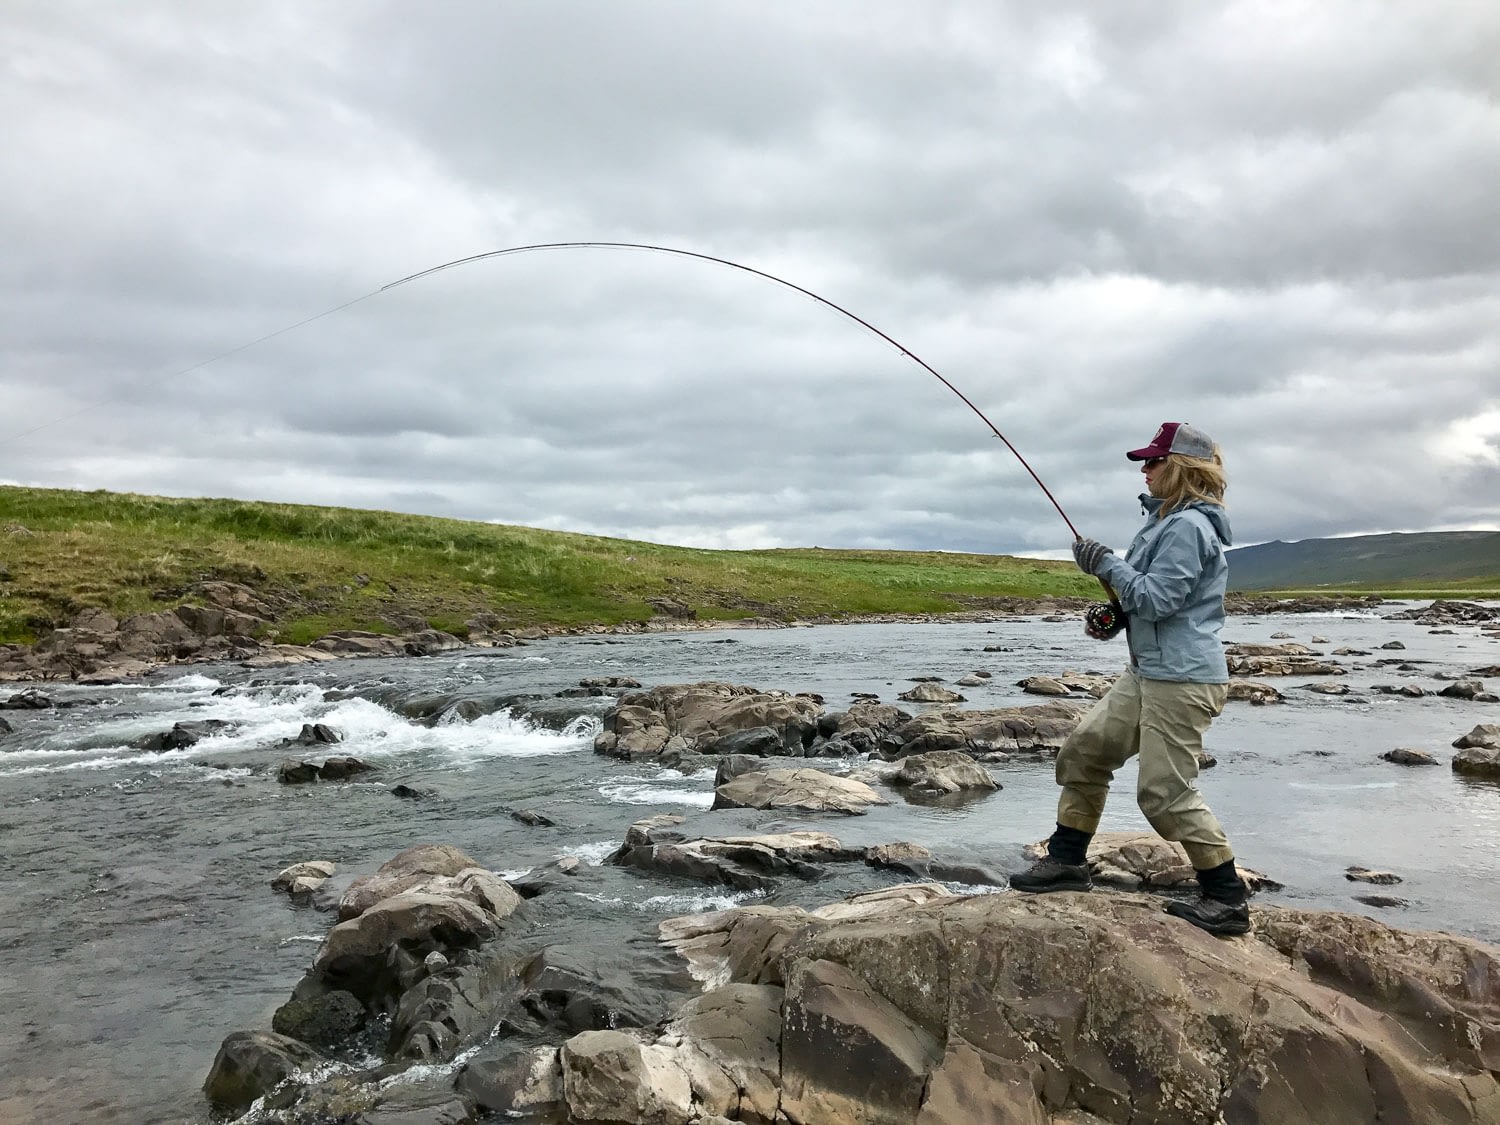 Casting a line into the calm waters of Laxa in Dolum